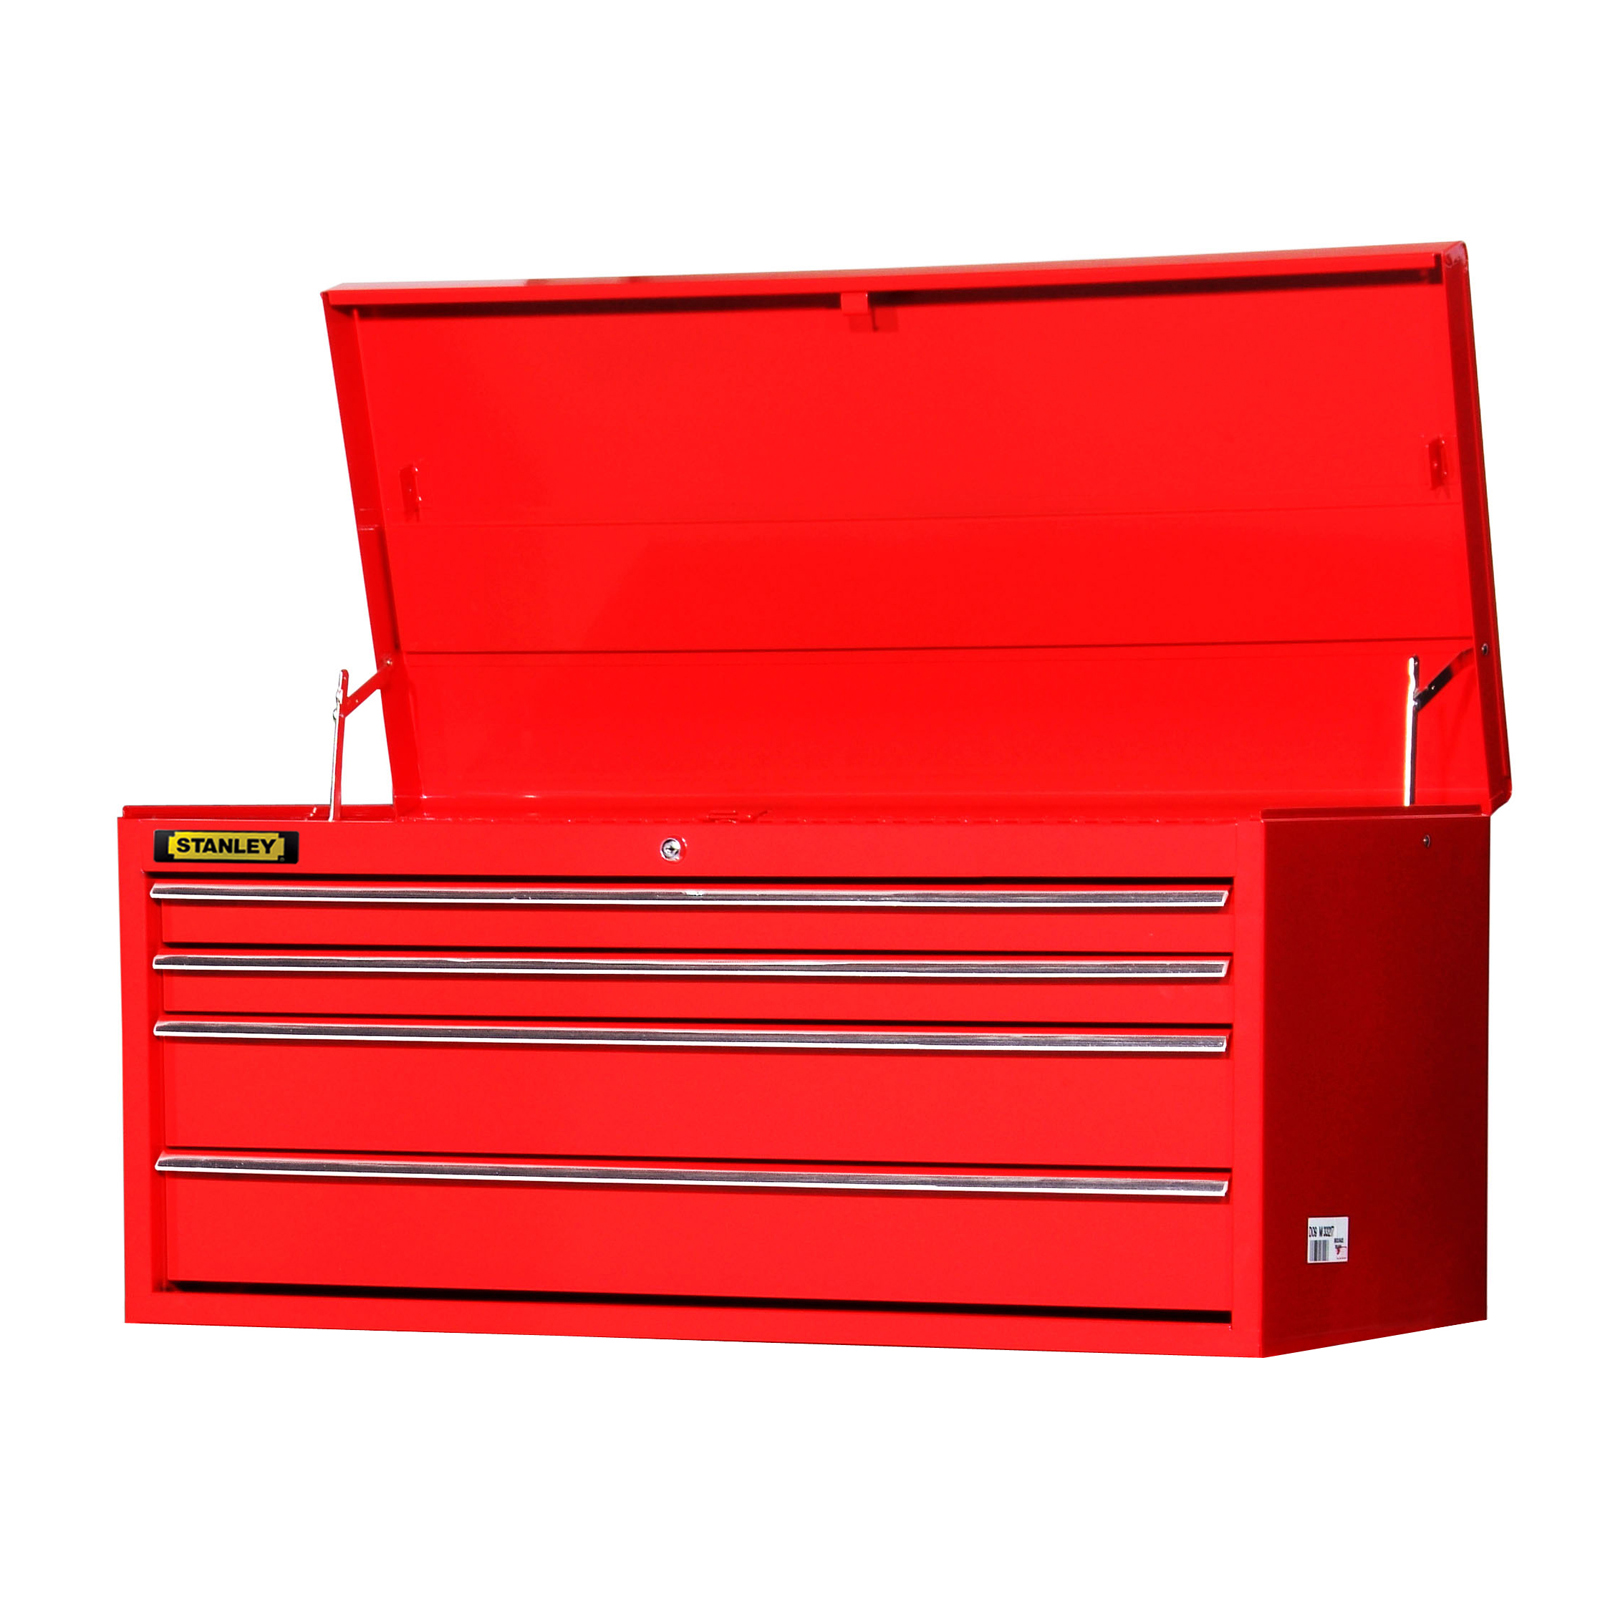 Stanley 42" 4-Drawer Ball Bearing Slides Top Chest, Red, PLUS FREE SHIPPING